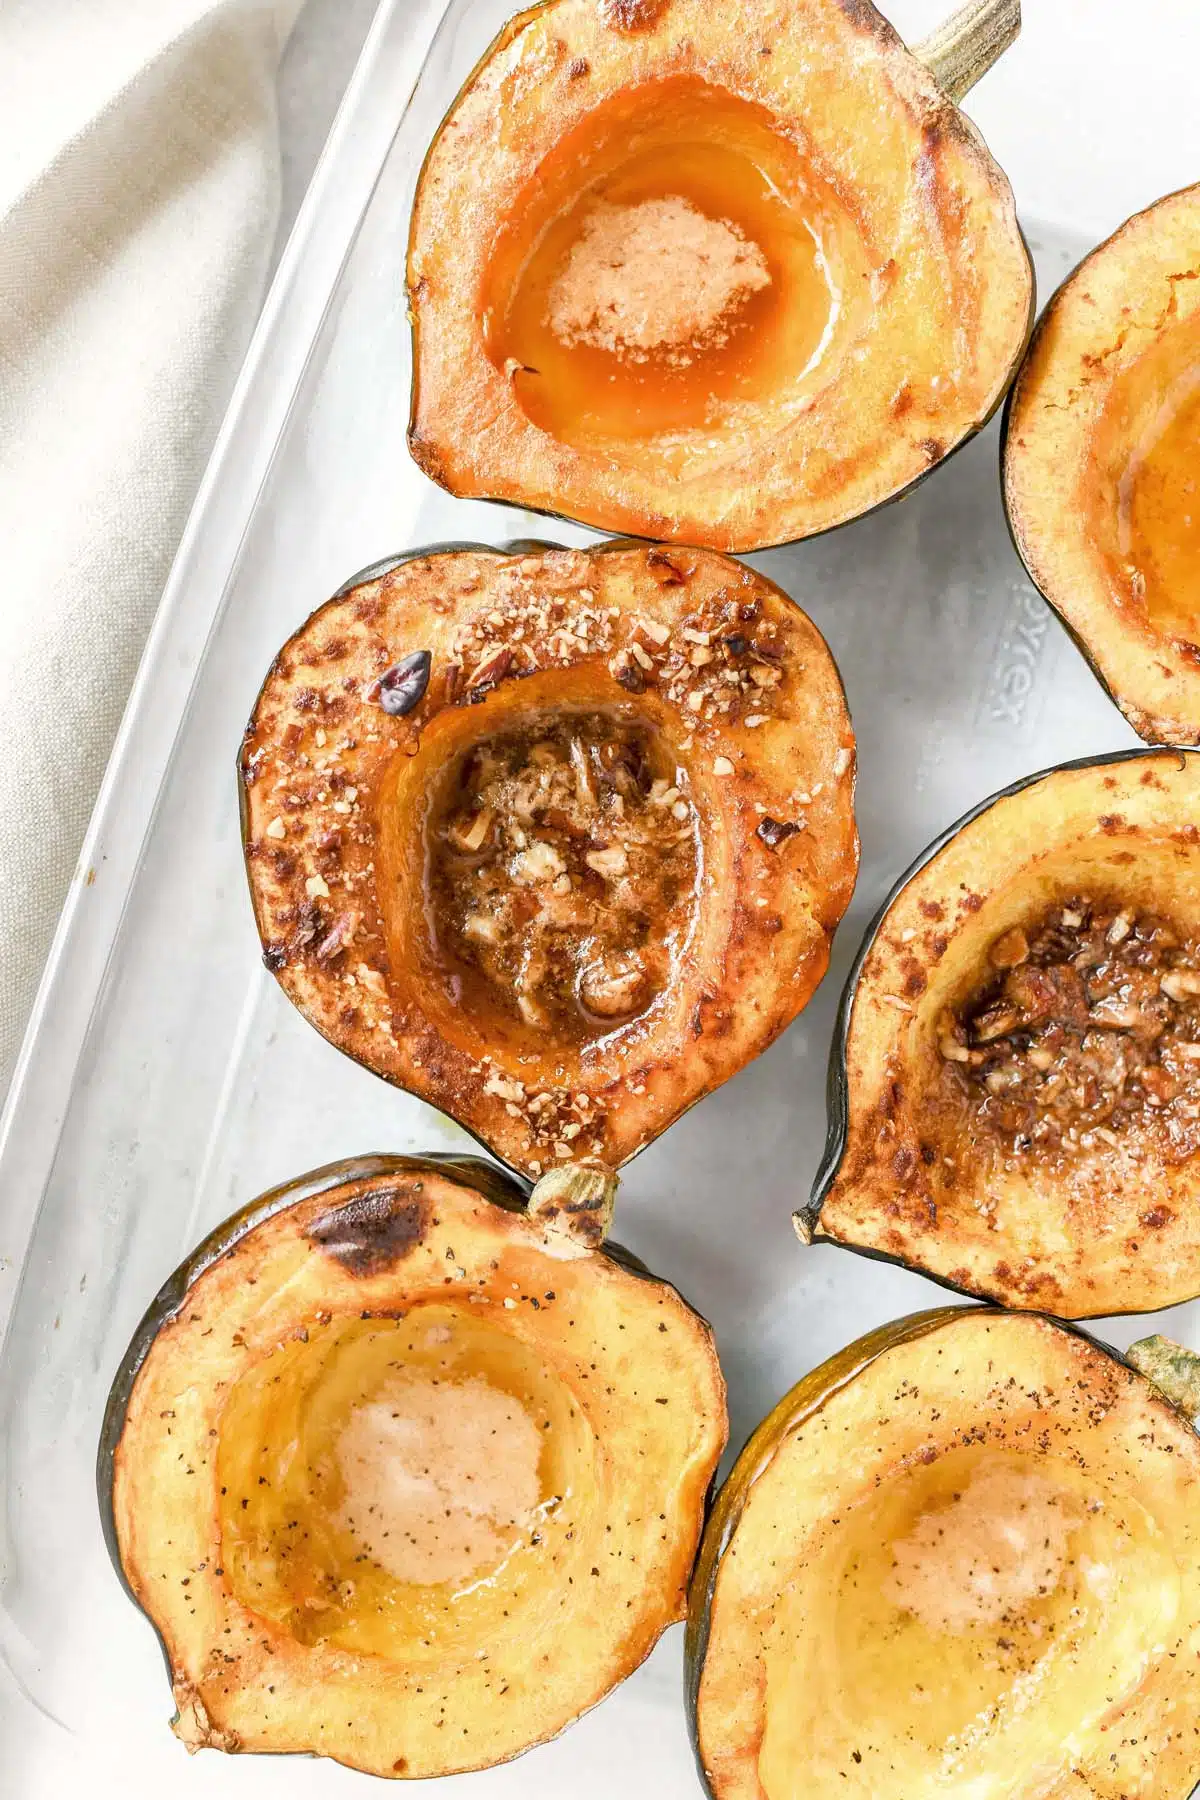 Acorn Squash roasted with butter and nuts in a clear, glass dish.